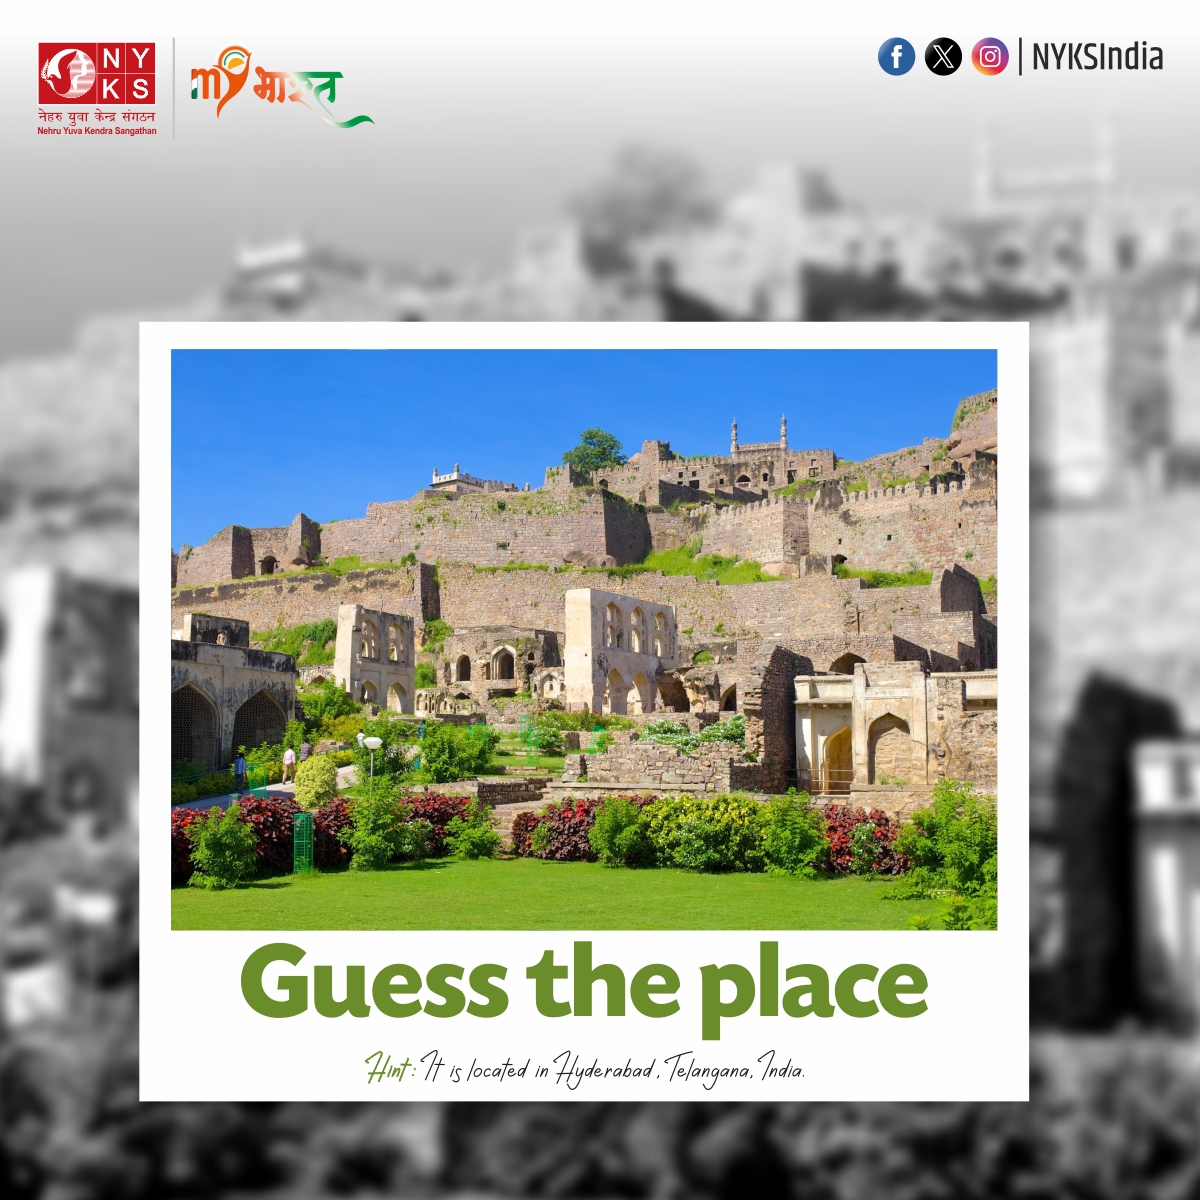 Can you guess the name of this magnificent heritage site in India? 🕌 Put your knowledge to the test and tell us where you think this awe-inspiring monument is located! 

#IndiaHeritage #GuessThePlace #NYKS #Hyderabad